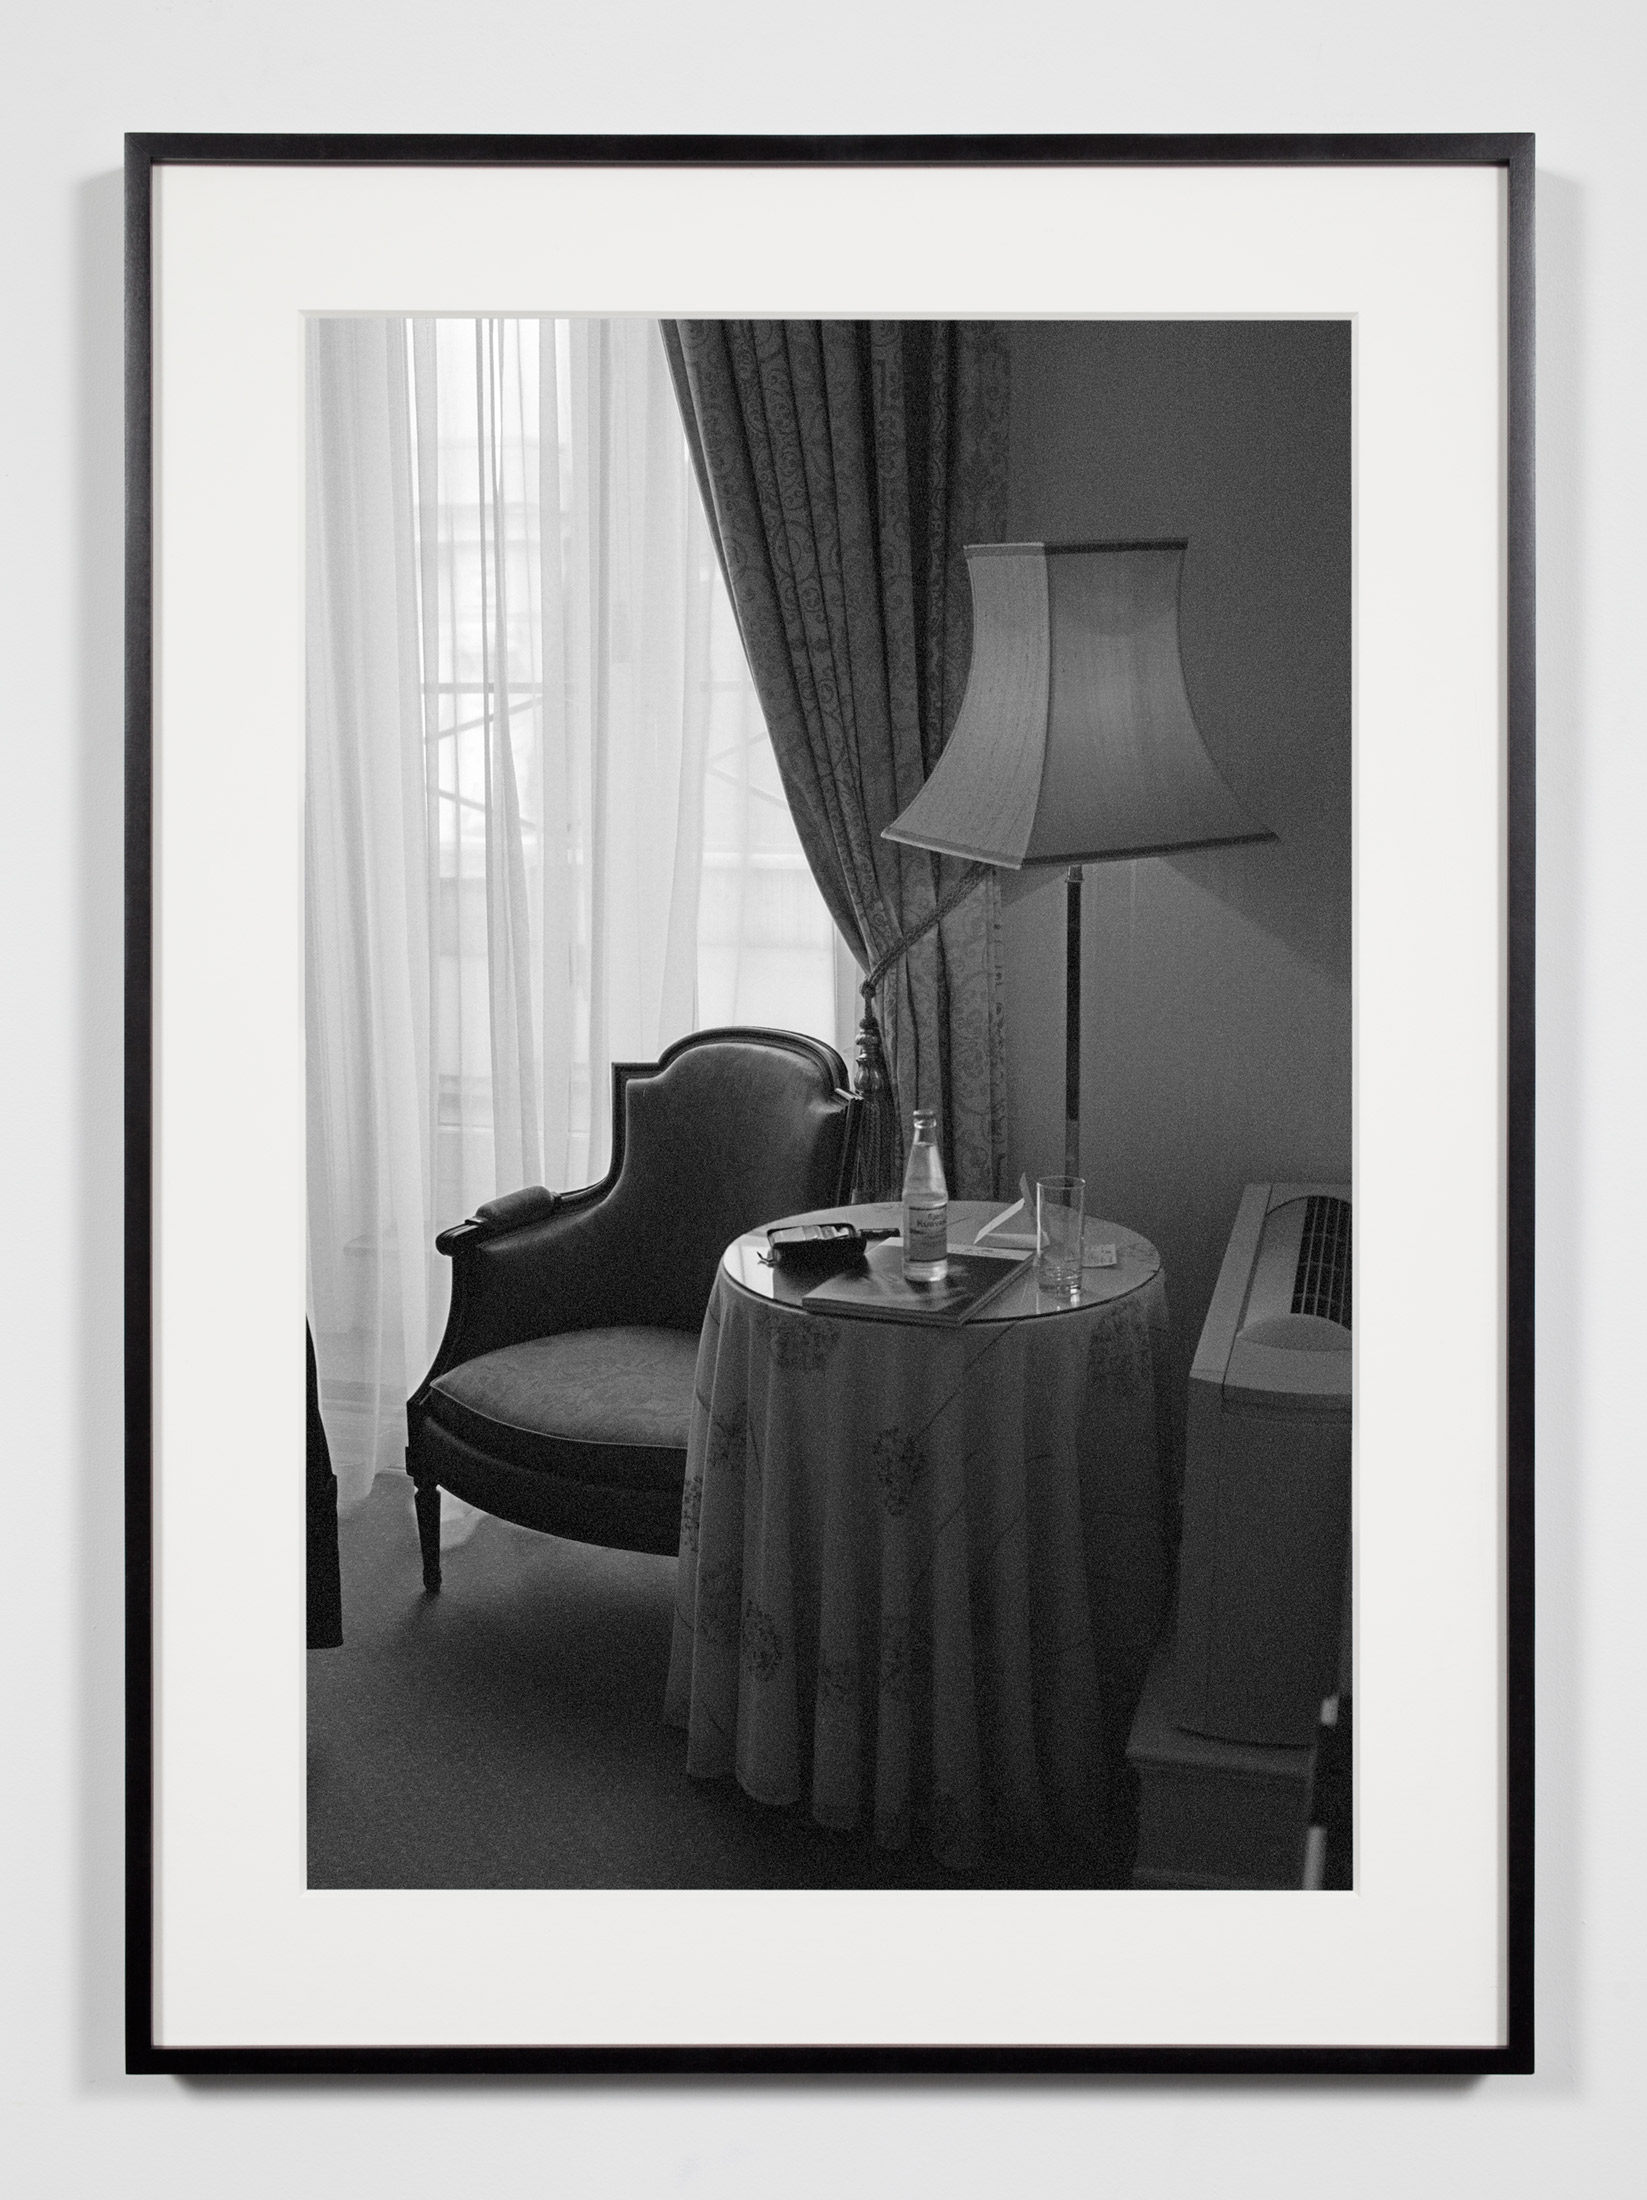   Hotel Room, Copenhagen, Denmark, May 15, 2010   2011  Epson Ultrachrome K3 archival ink jet print on Hahnemühle Photo Rag paper  36 3/8 x 26 3/8 inches   Industrial Portraits, 2008–    A Diagram of Forces, 2011     